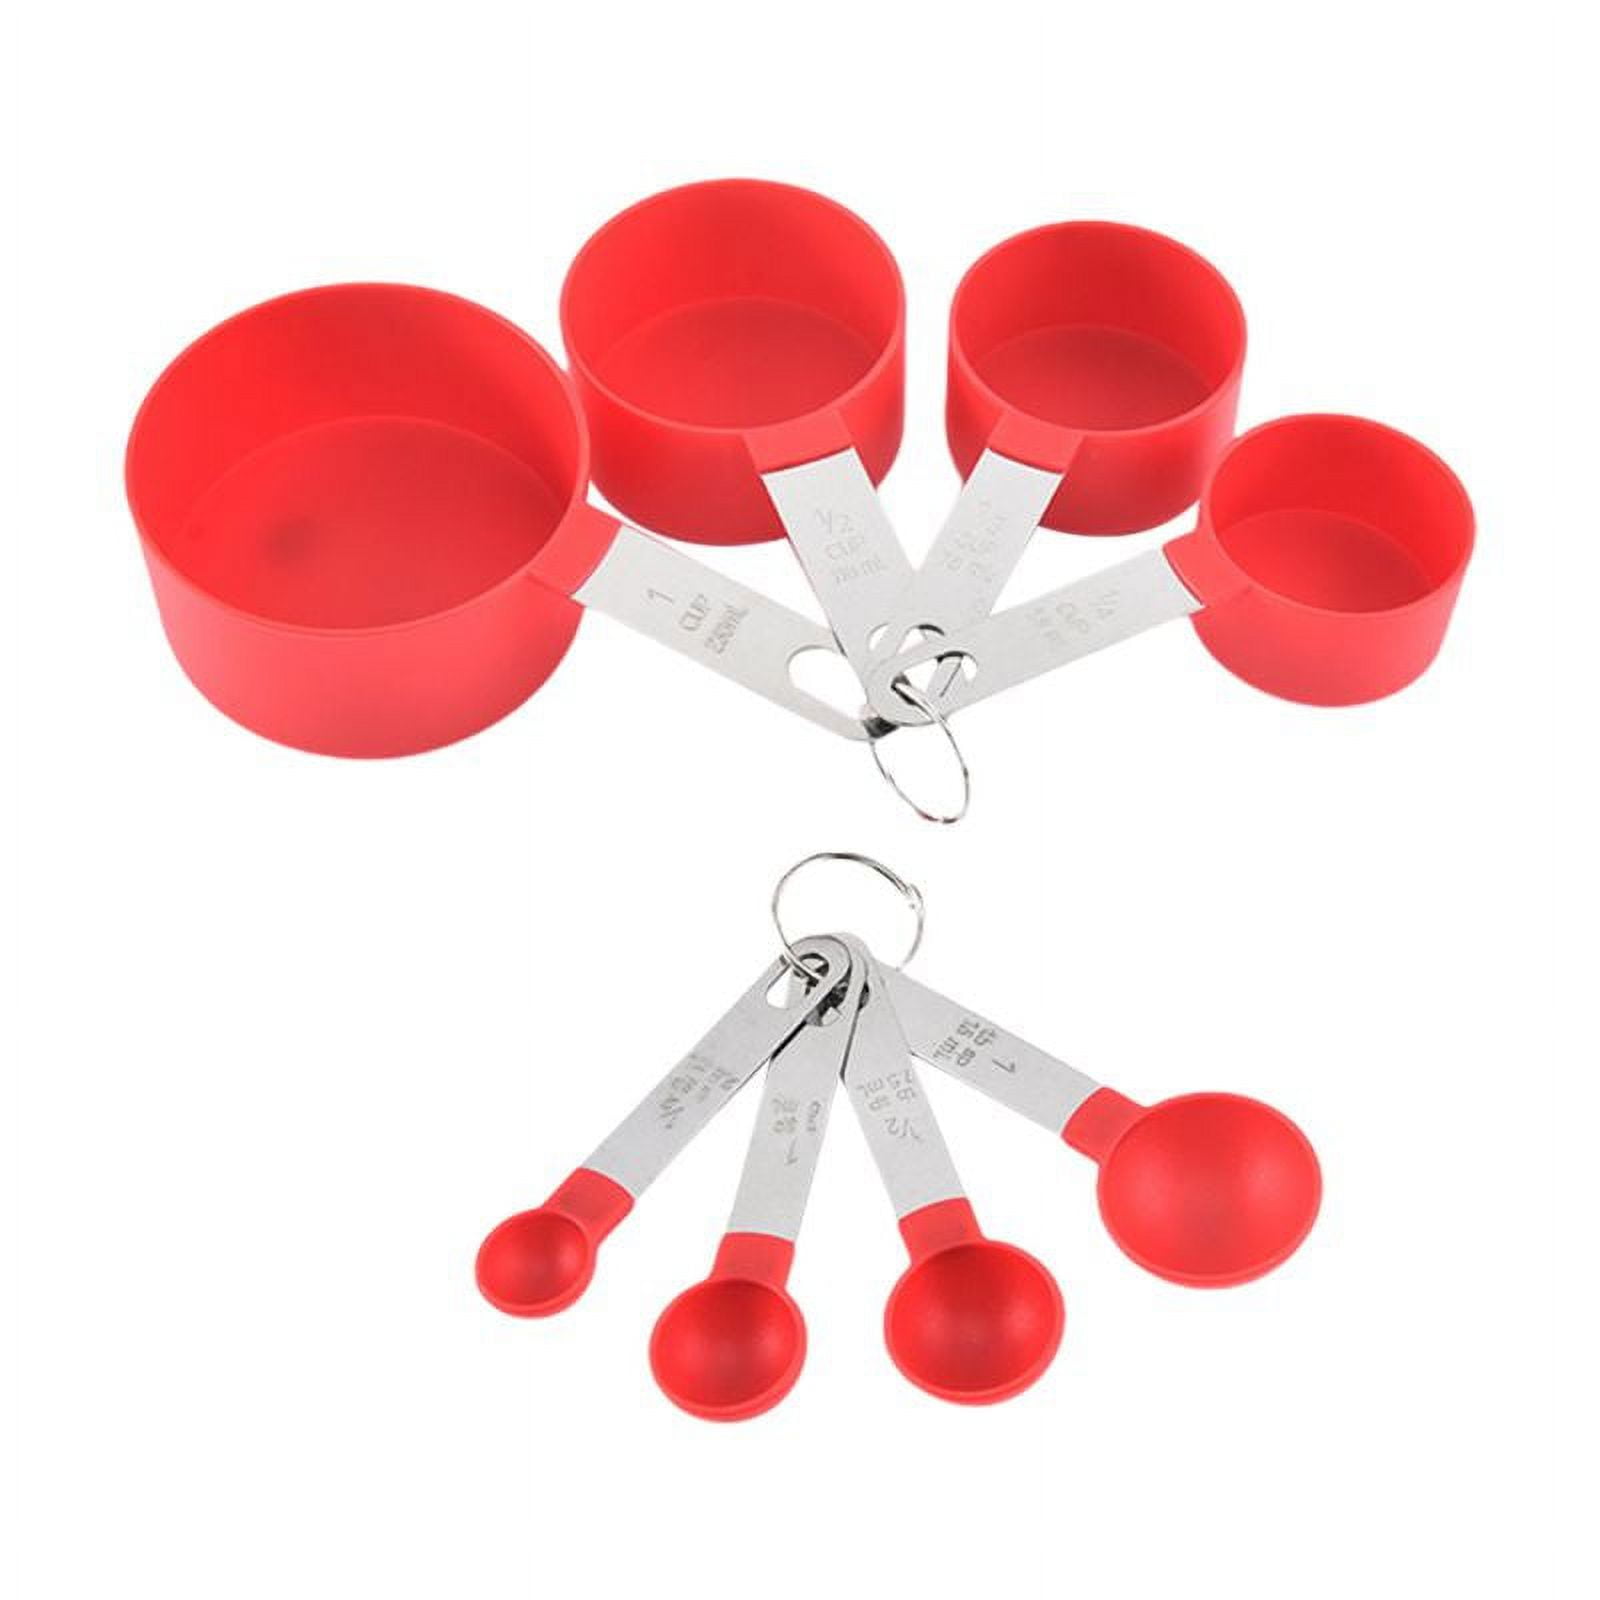 Measuring Cups And Spoons 8-piece Set Plastic Accurate Measuring Spoons  With Stainless Steel Handle Bpa Free And Dishwasher Safe - Measuring Spoons  - AliExpress